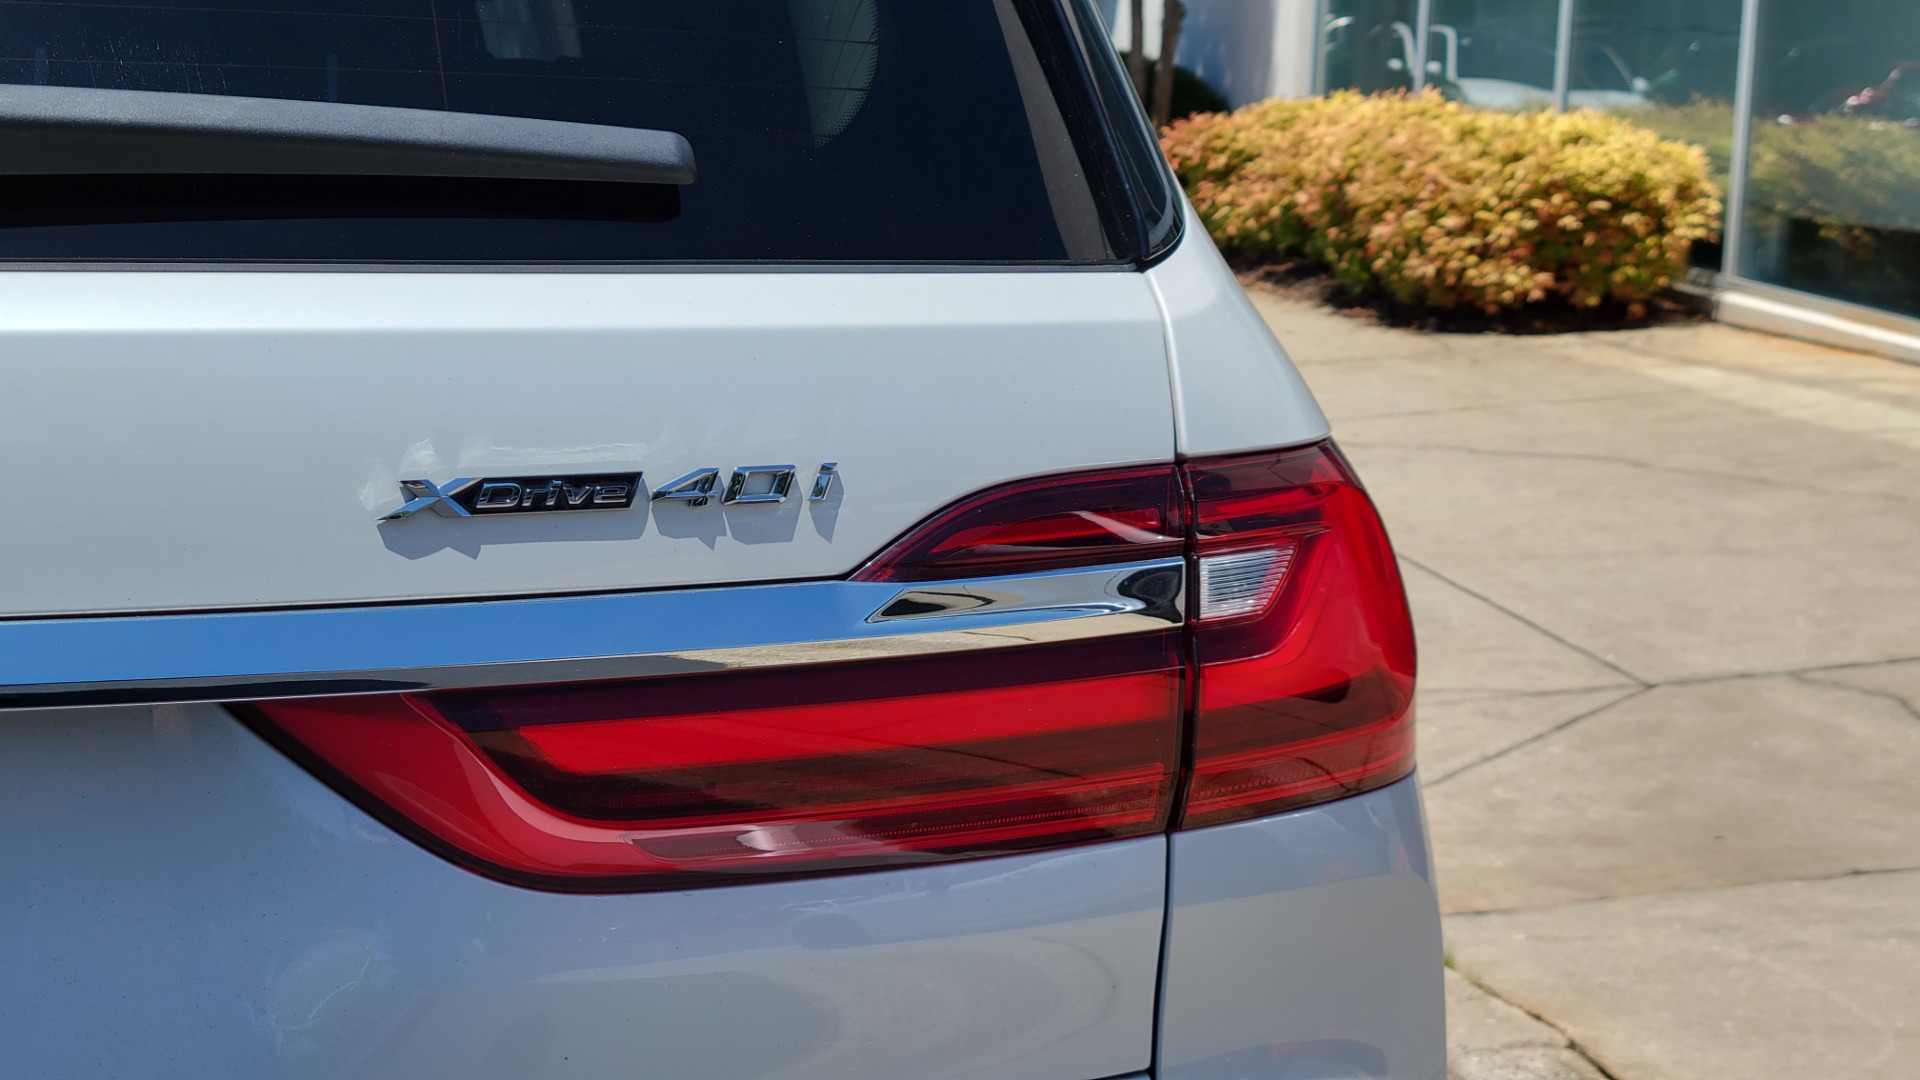 Used 2019 BMW X7 XDRIVE40I PREMIUM / NAV / HUD / PARK ASST PLUS / REMOTE START / 3D VIEW for sale Sold at Formula Imports in Charlotte NC 28227 41